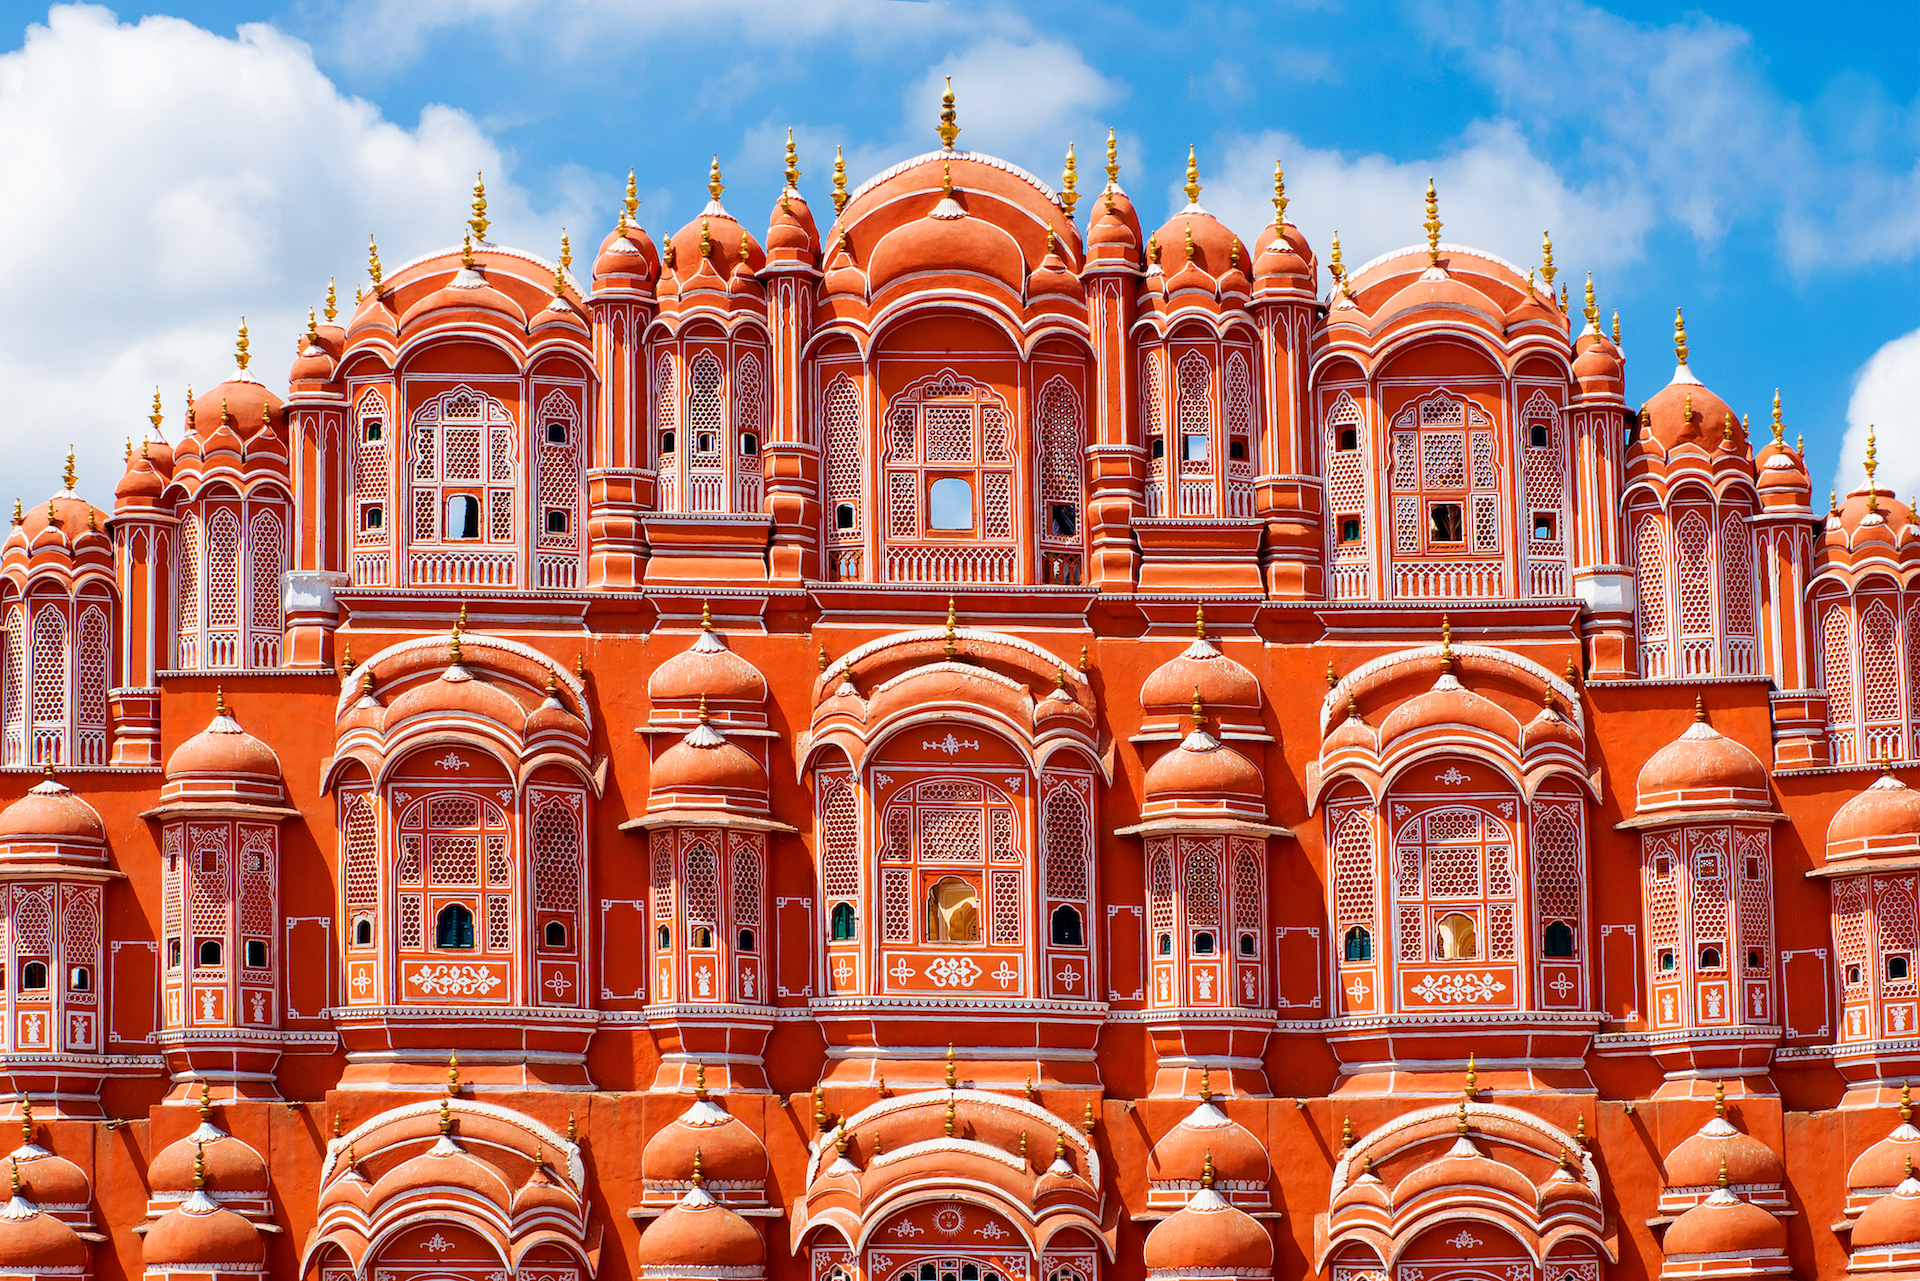 The capital of Rajasthan Jaipur - popularly known as the “Pink City”